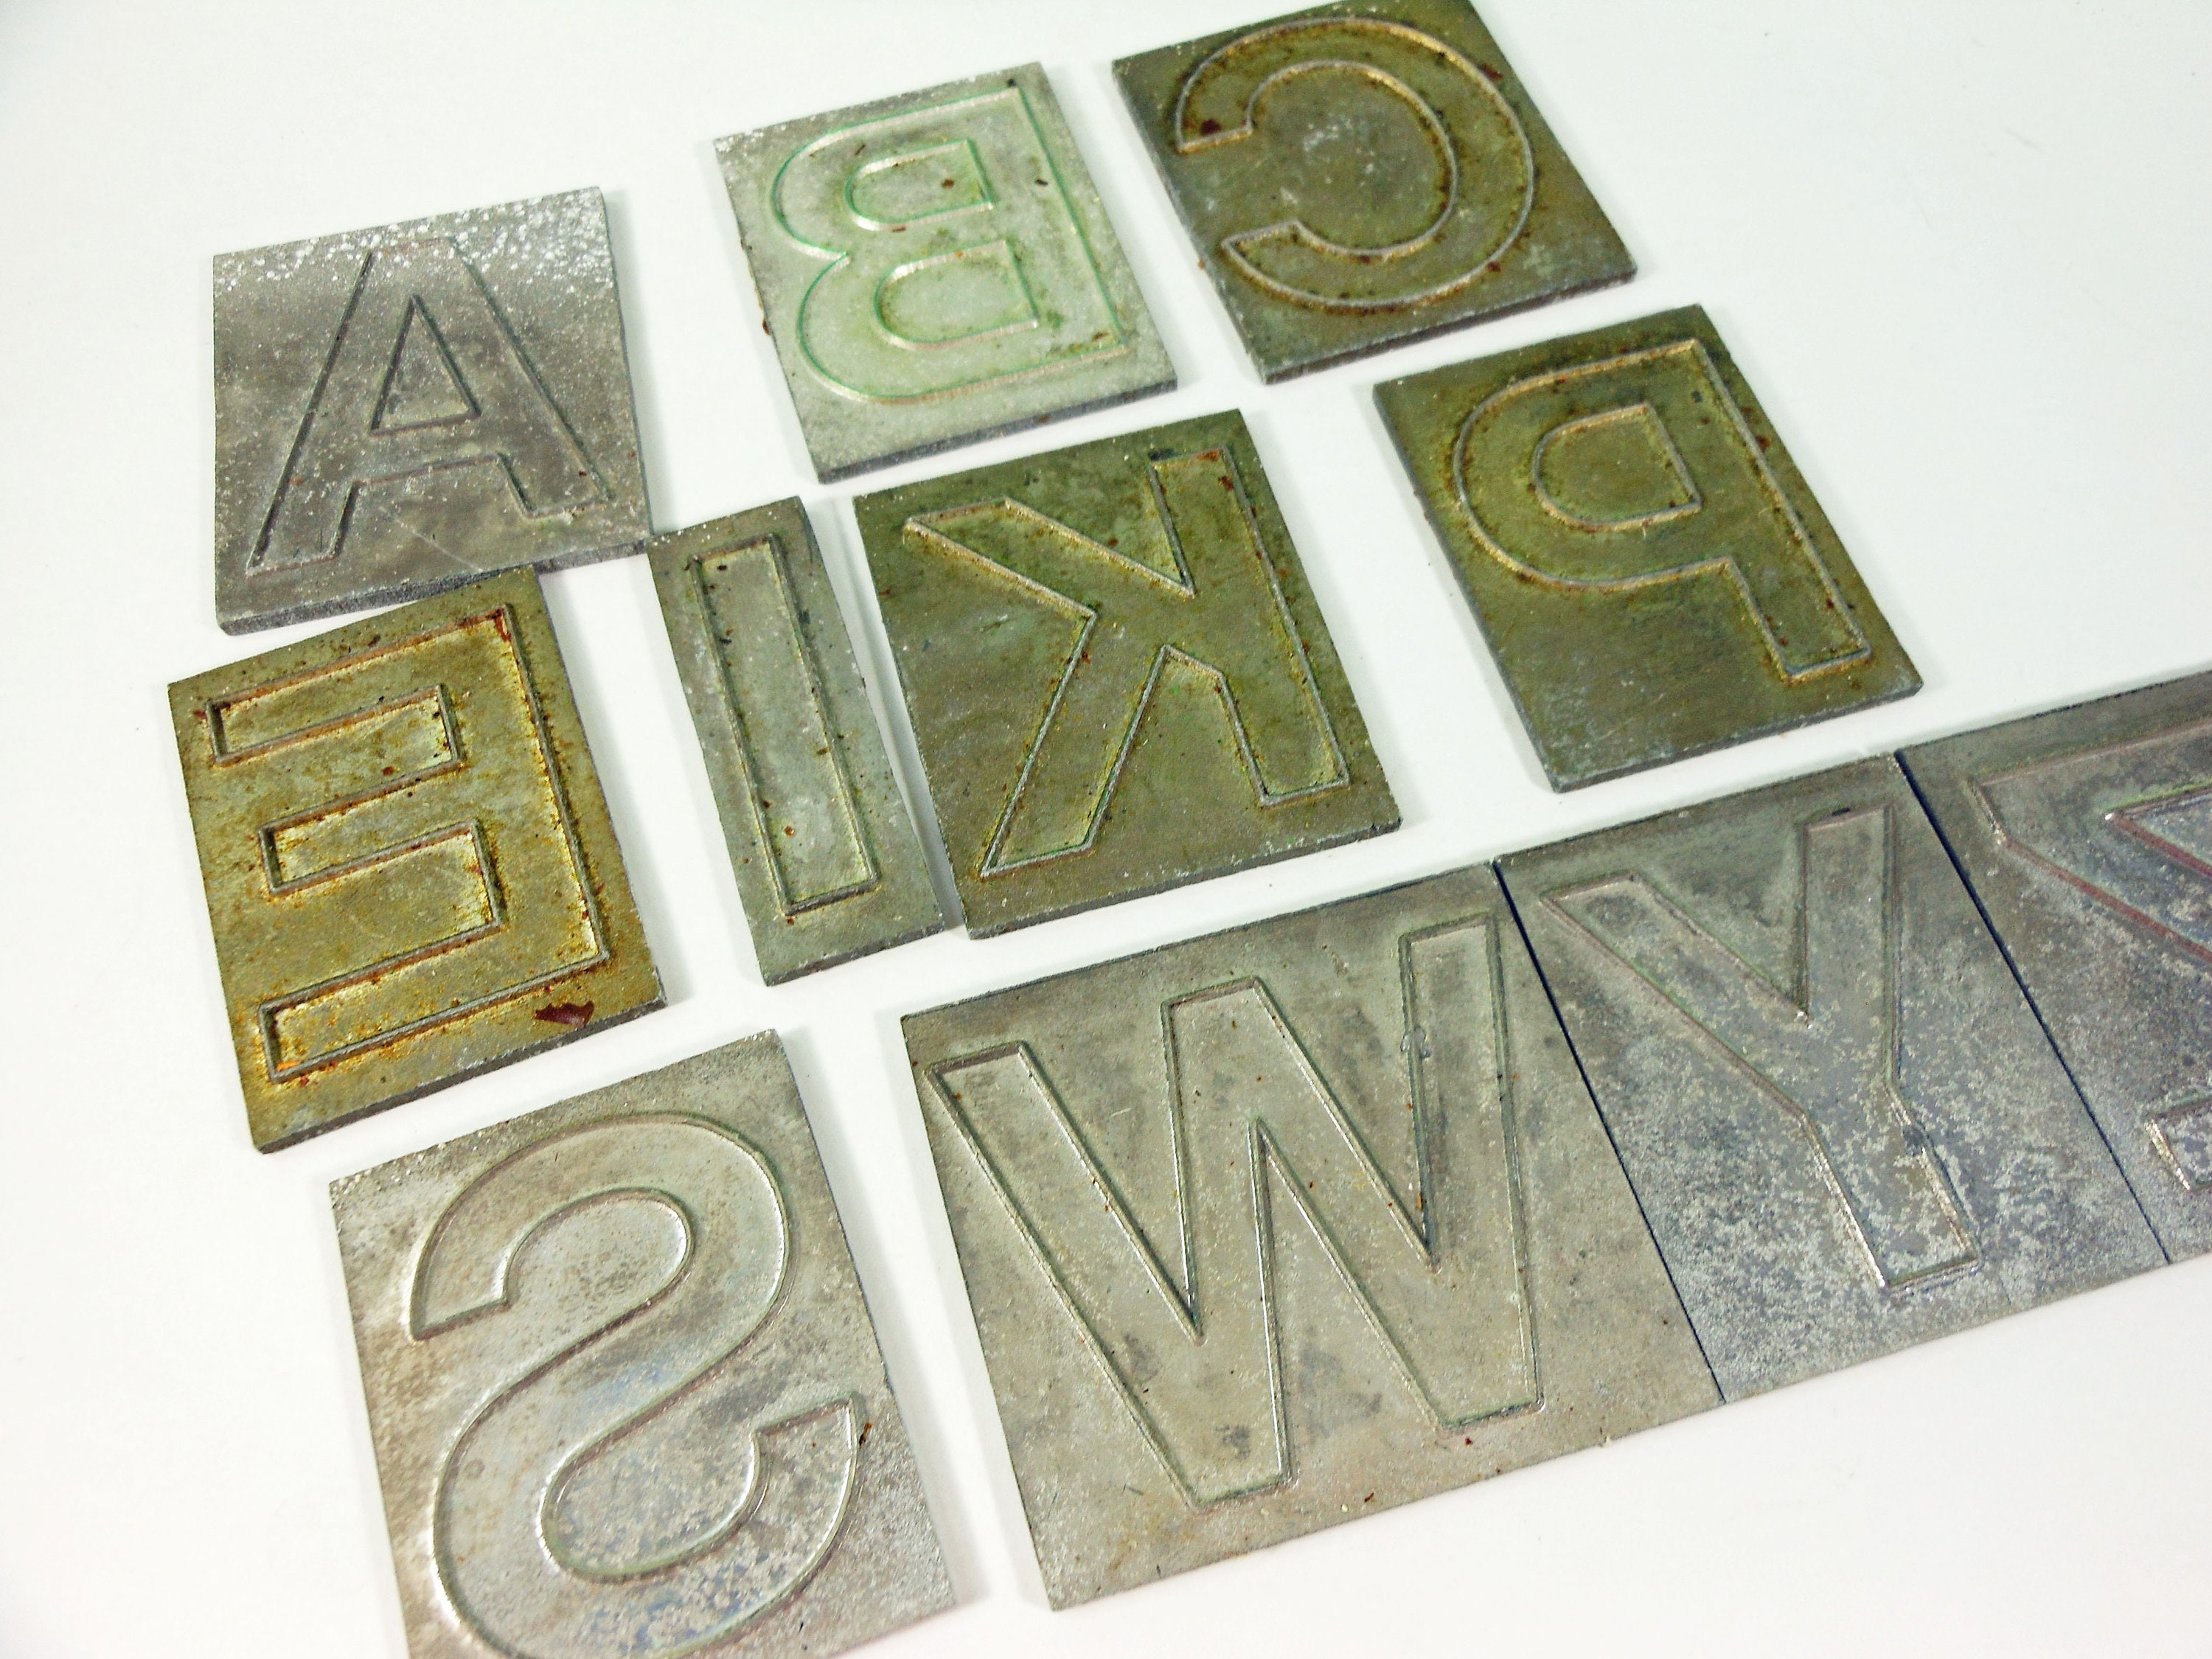 Beadsmith® Decorative Letter Stamp Sets (2-3 mm)